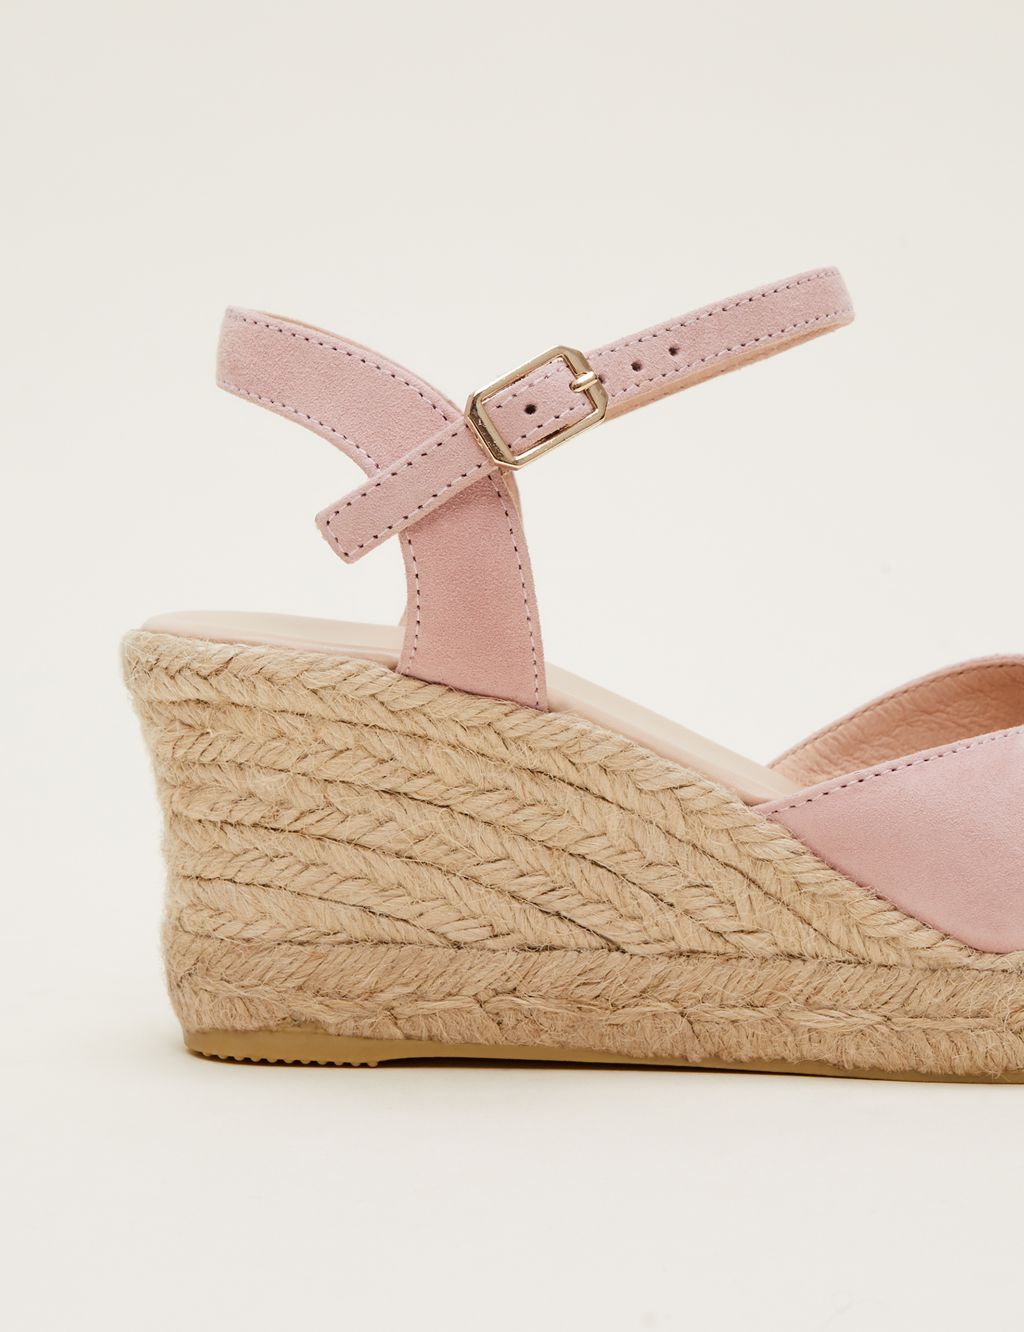 Leather Ankle Strap Wedge Espadrilles image 3